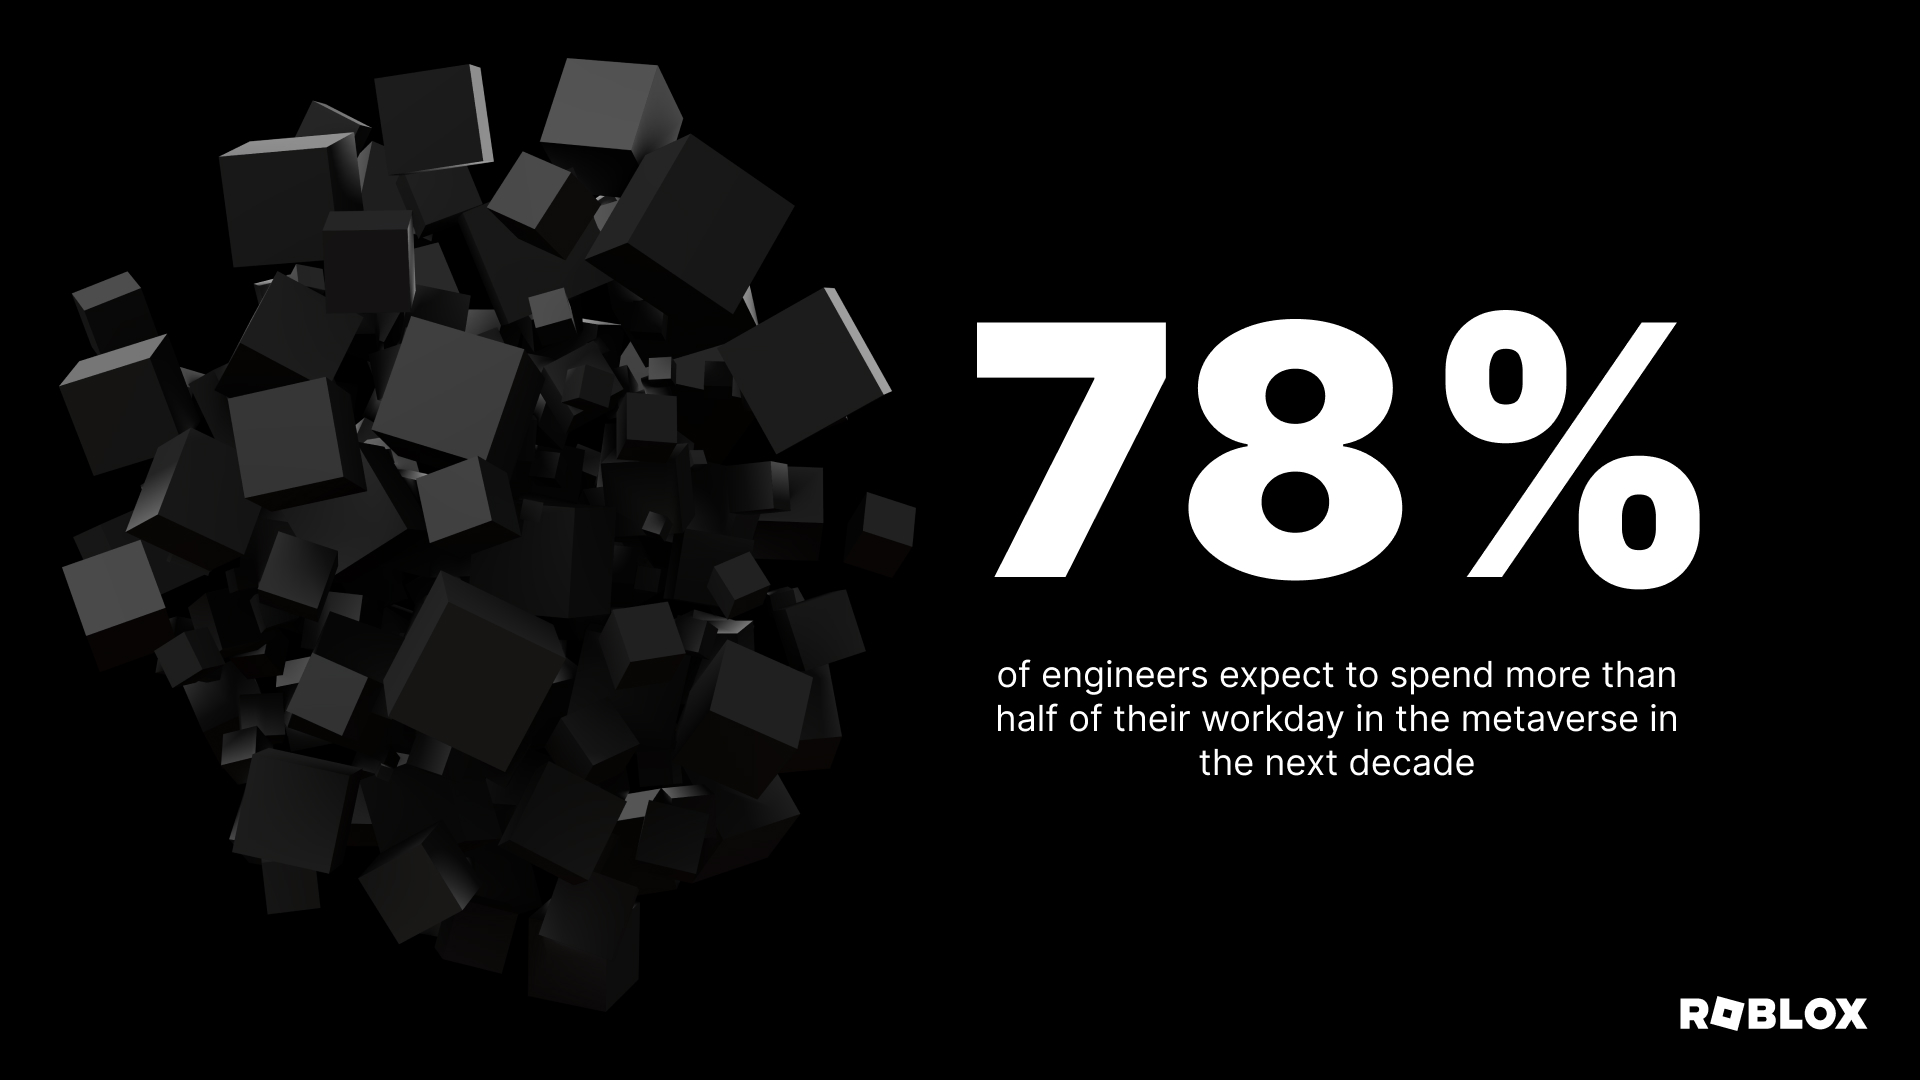 78% of engineers expect to spend more than half of their workday in the metaverse in the next decade